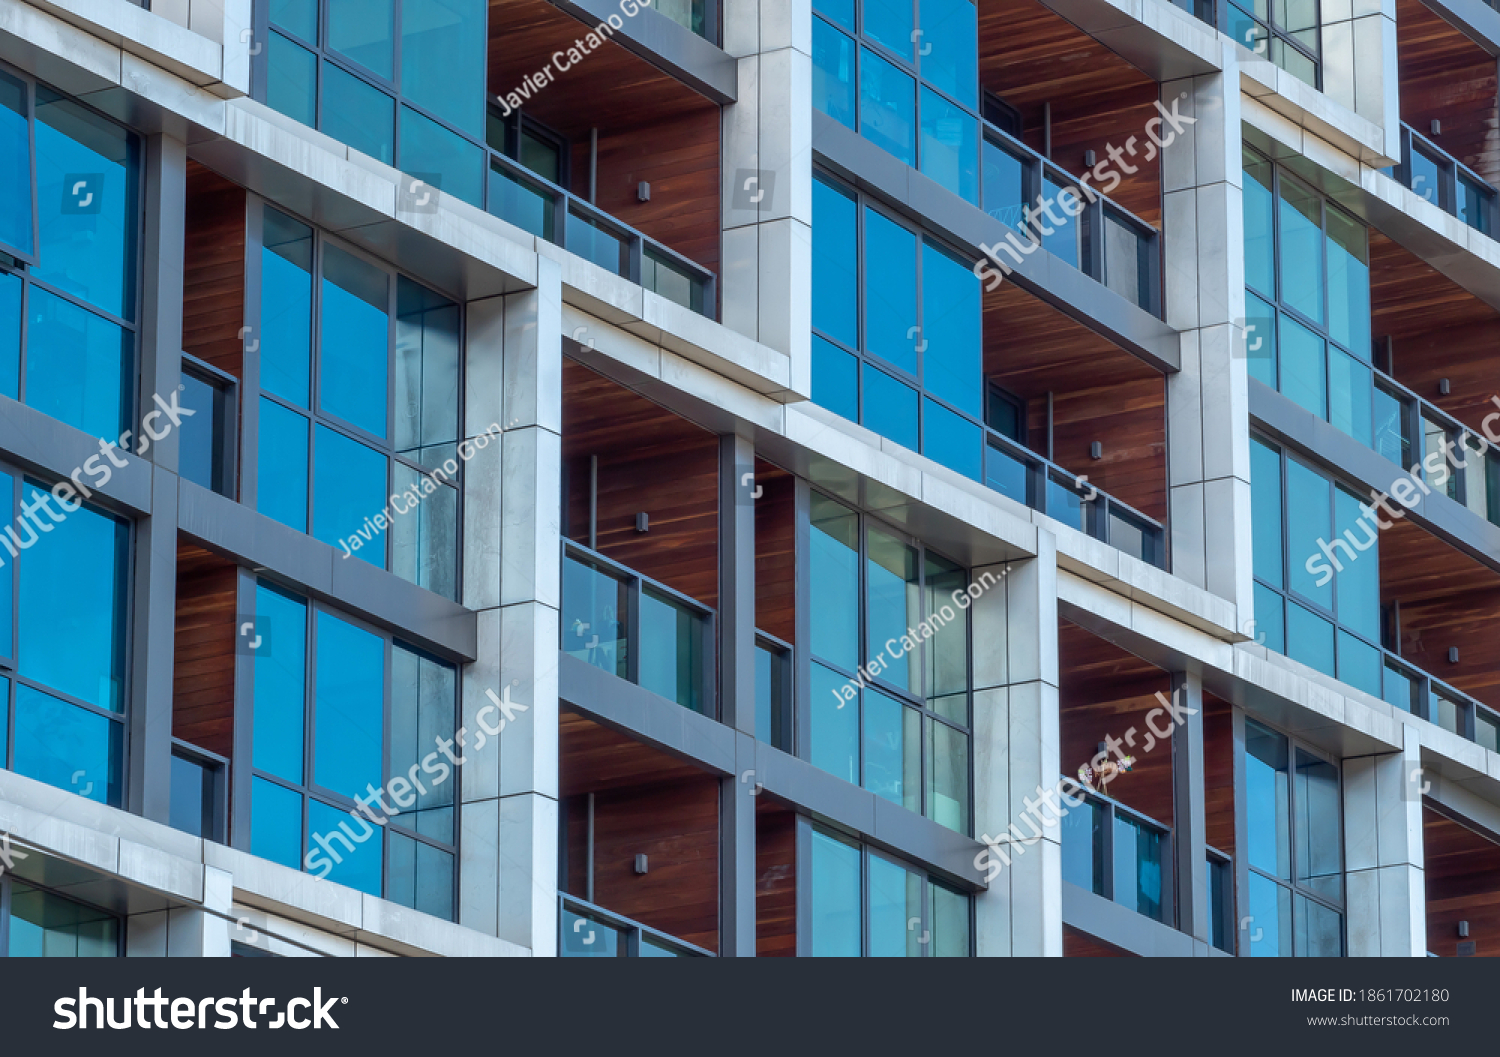 Close up of windows and balconies of a modern multi dwelling building of strata title living scheme. #1861702180